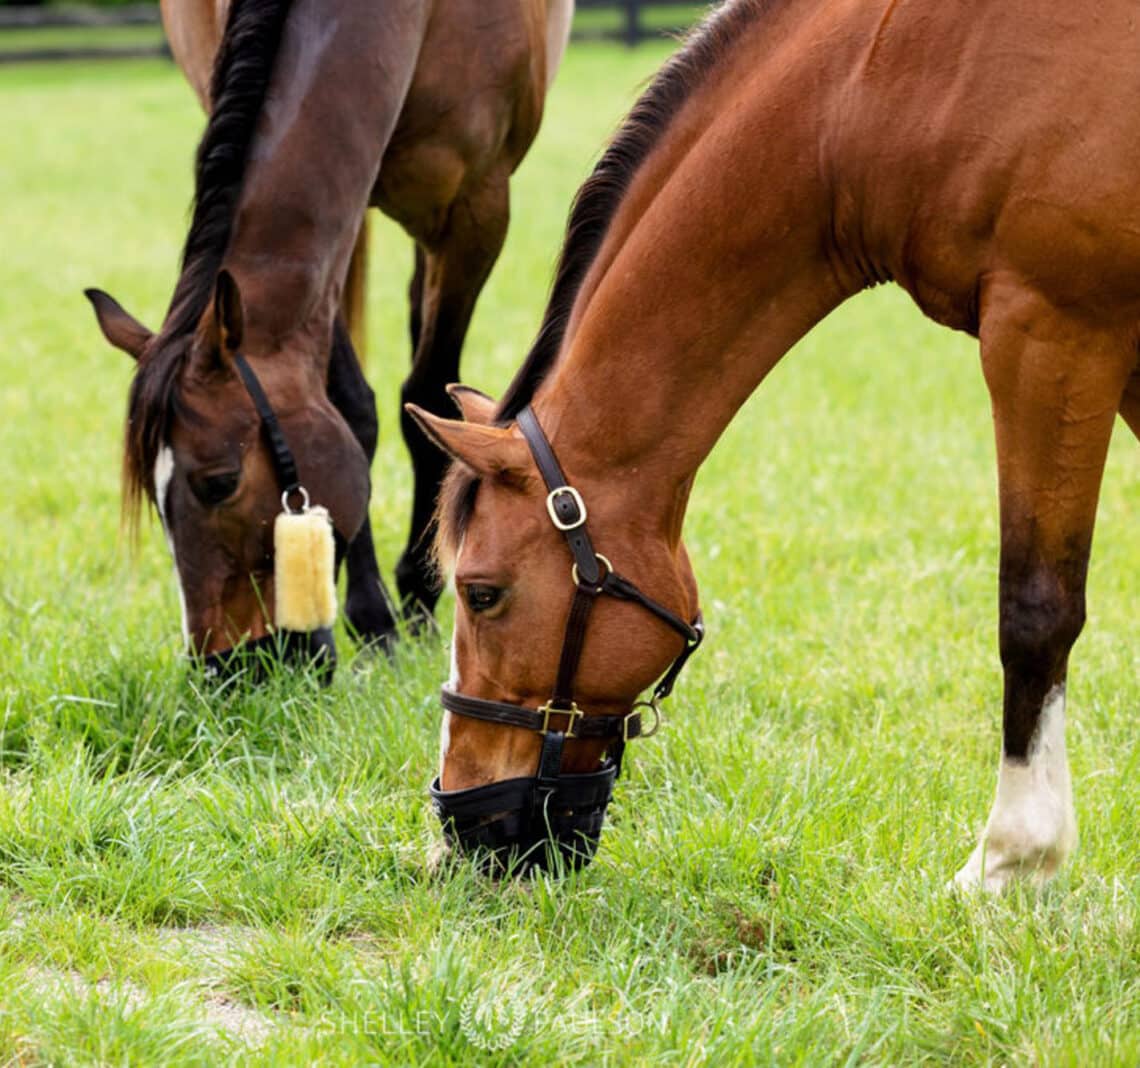 For overweight horses, a well-fitted grazing muzzle helps to limit intake. (Image: Shelley Paulson)